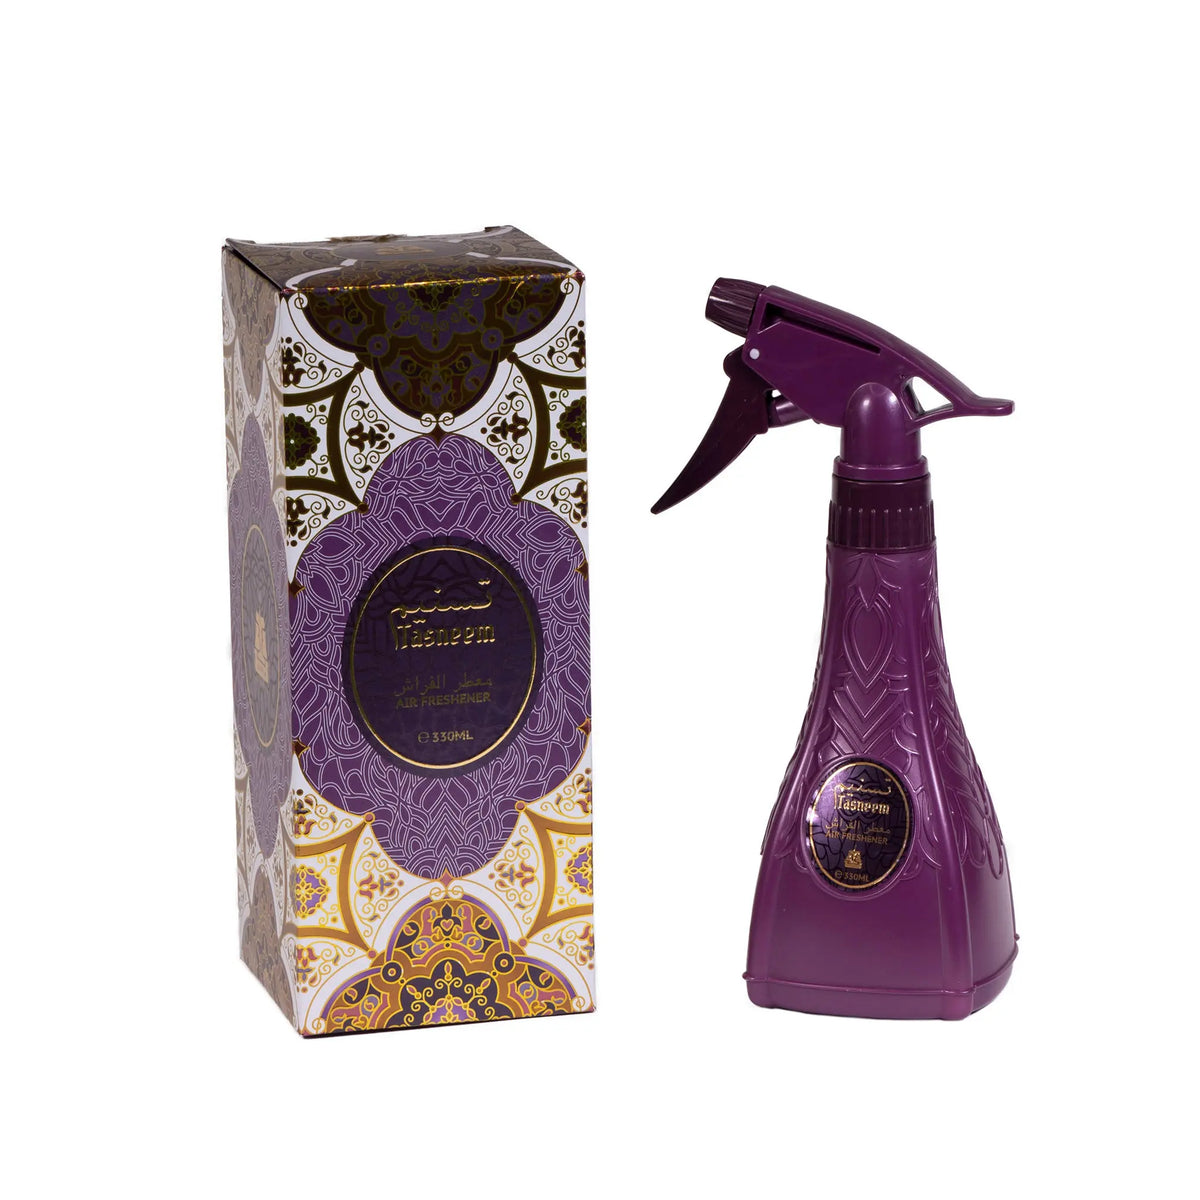 The image presents a set of an air freshener spray bottle and its corresponding packaging box. The spray bottle has a rich purple color with a darker purple trigger and is adorned with an embossed decorative design. The box carries a cohesive design with a blend of purple, gold, and white arabesque patterns. The design of both the bottle and the box is reminiscent of Middle Eastern art and calligraphy.